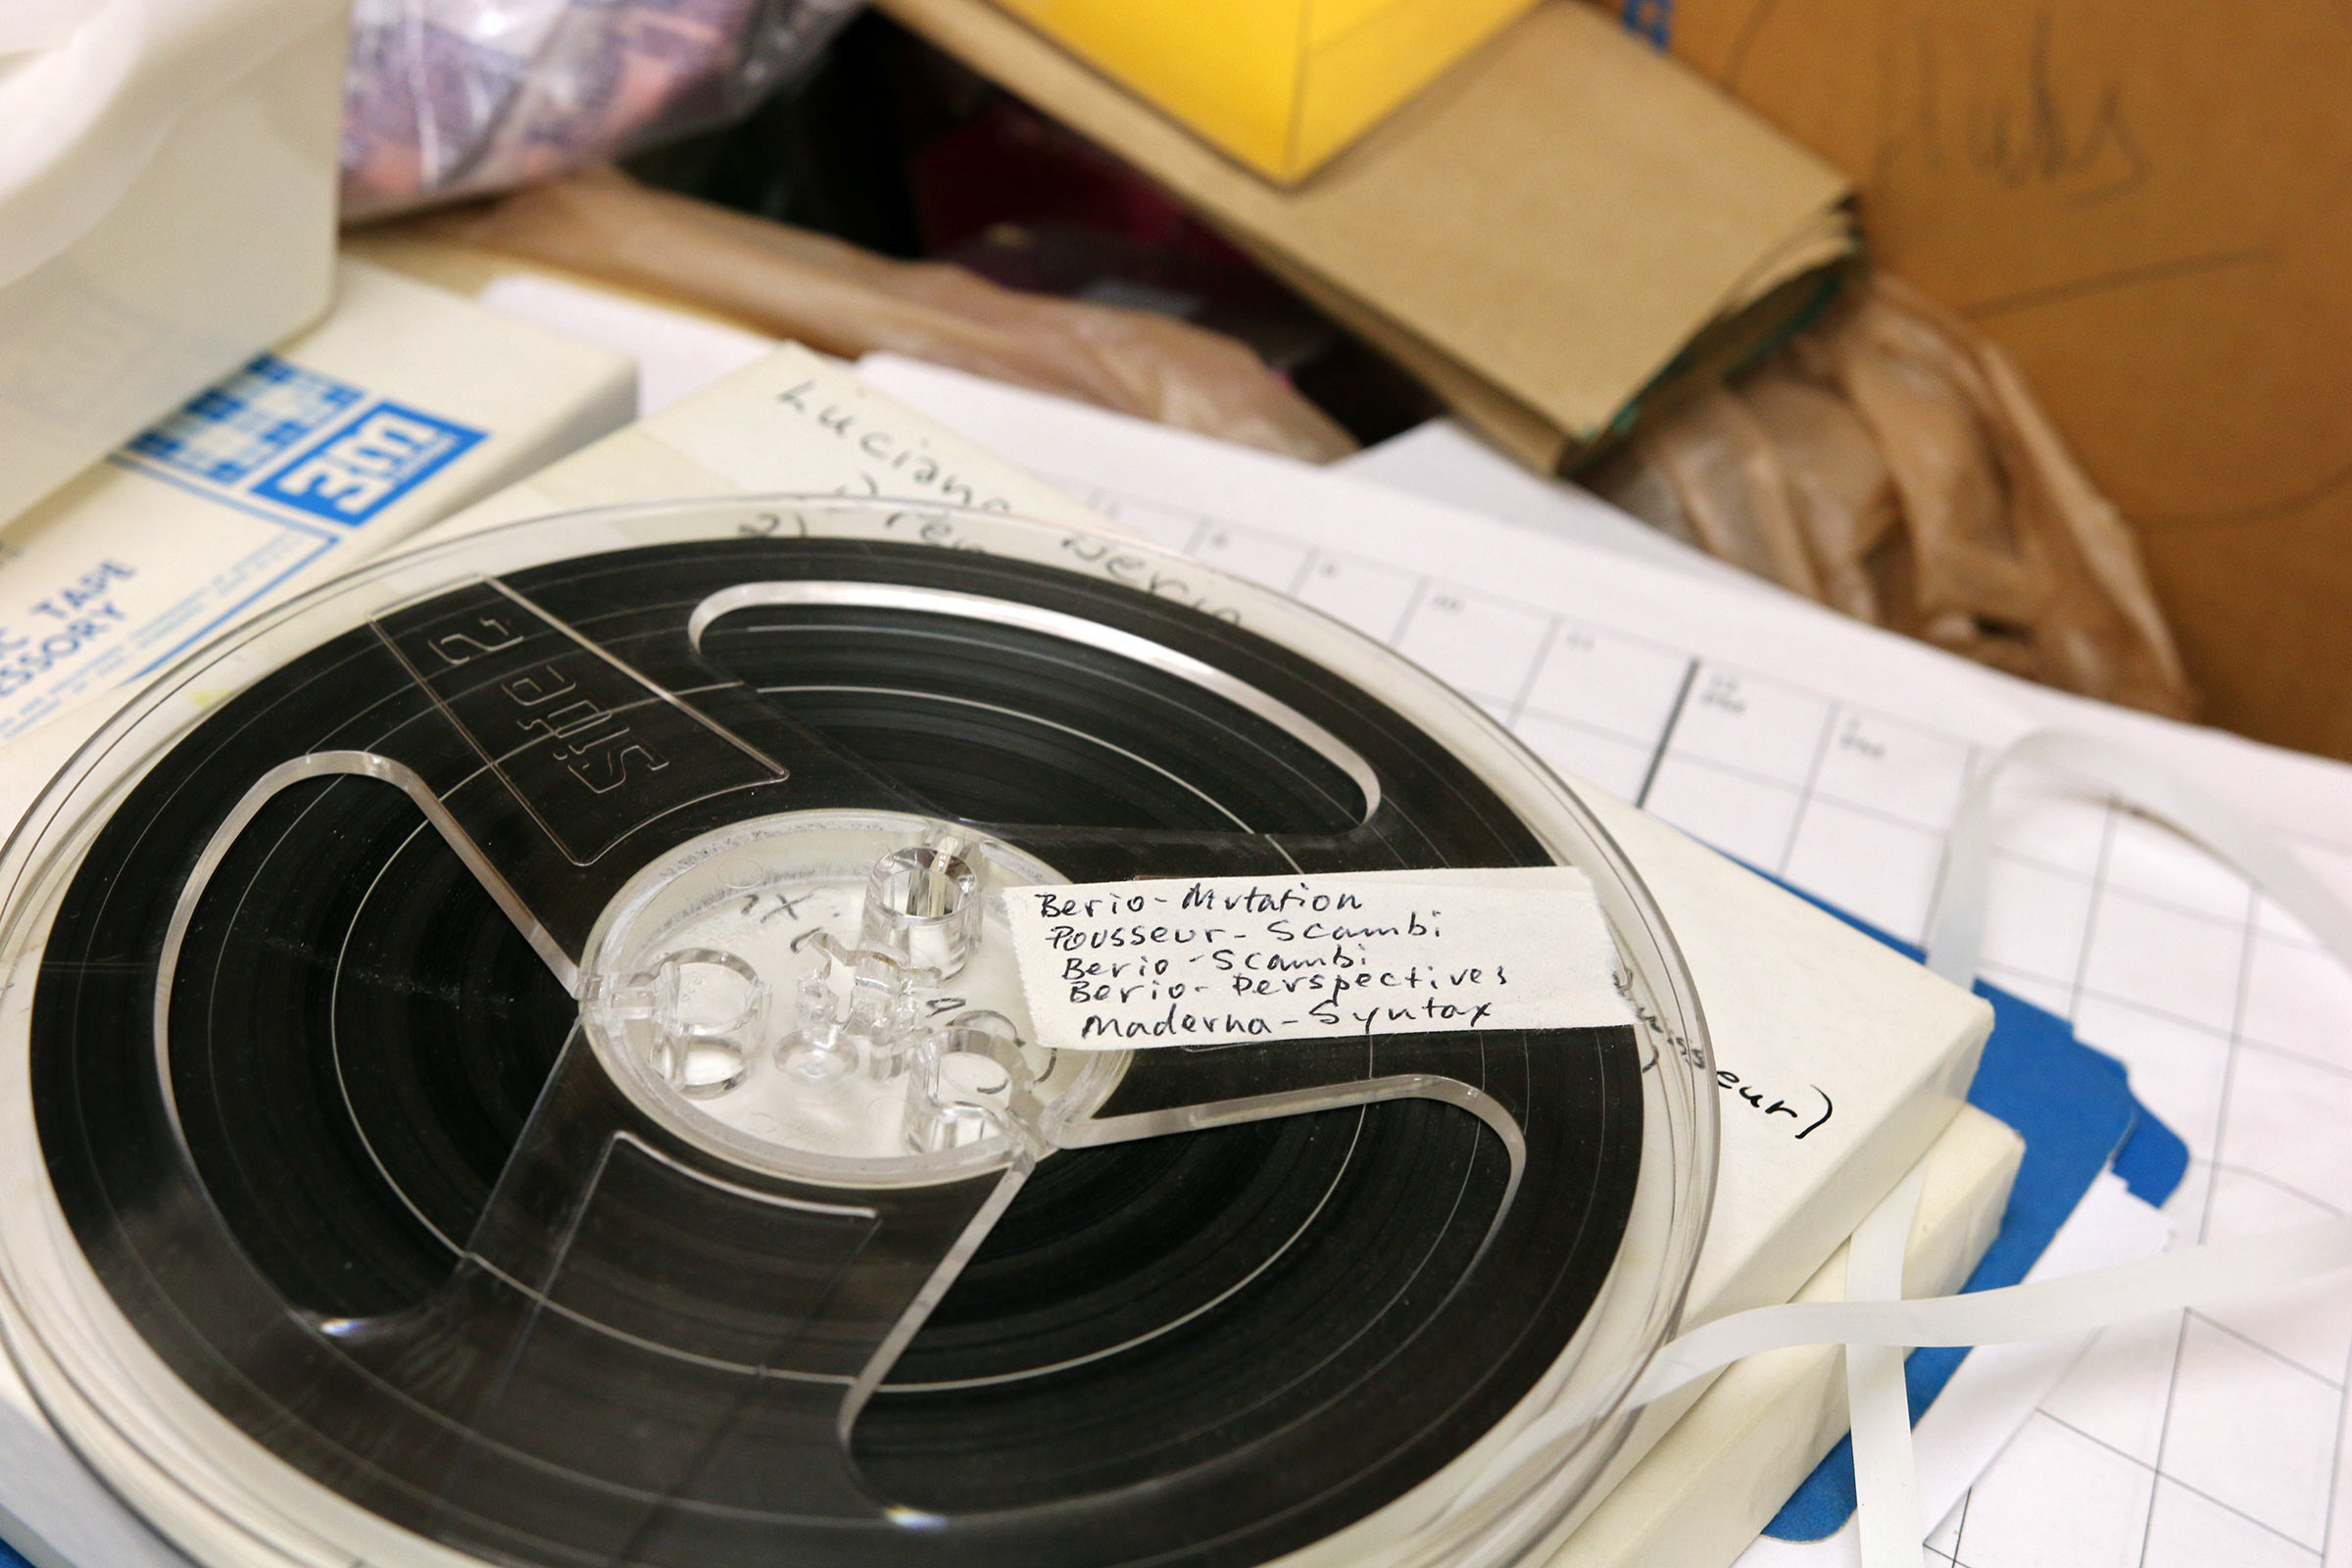 A reel-to-reel containing recordings of several classic 1950s tape music compositions by Luciano Berio, Henri Pousseur, and Bruno Maderna is one of the treasures on display in Daria Semegen’s electronic music studio at Stony Brook University.